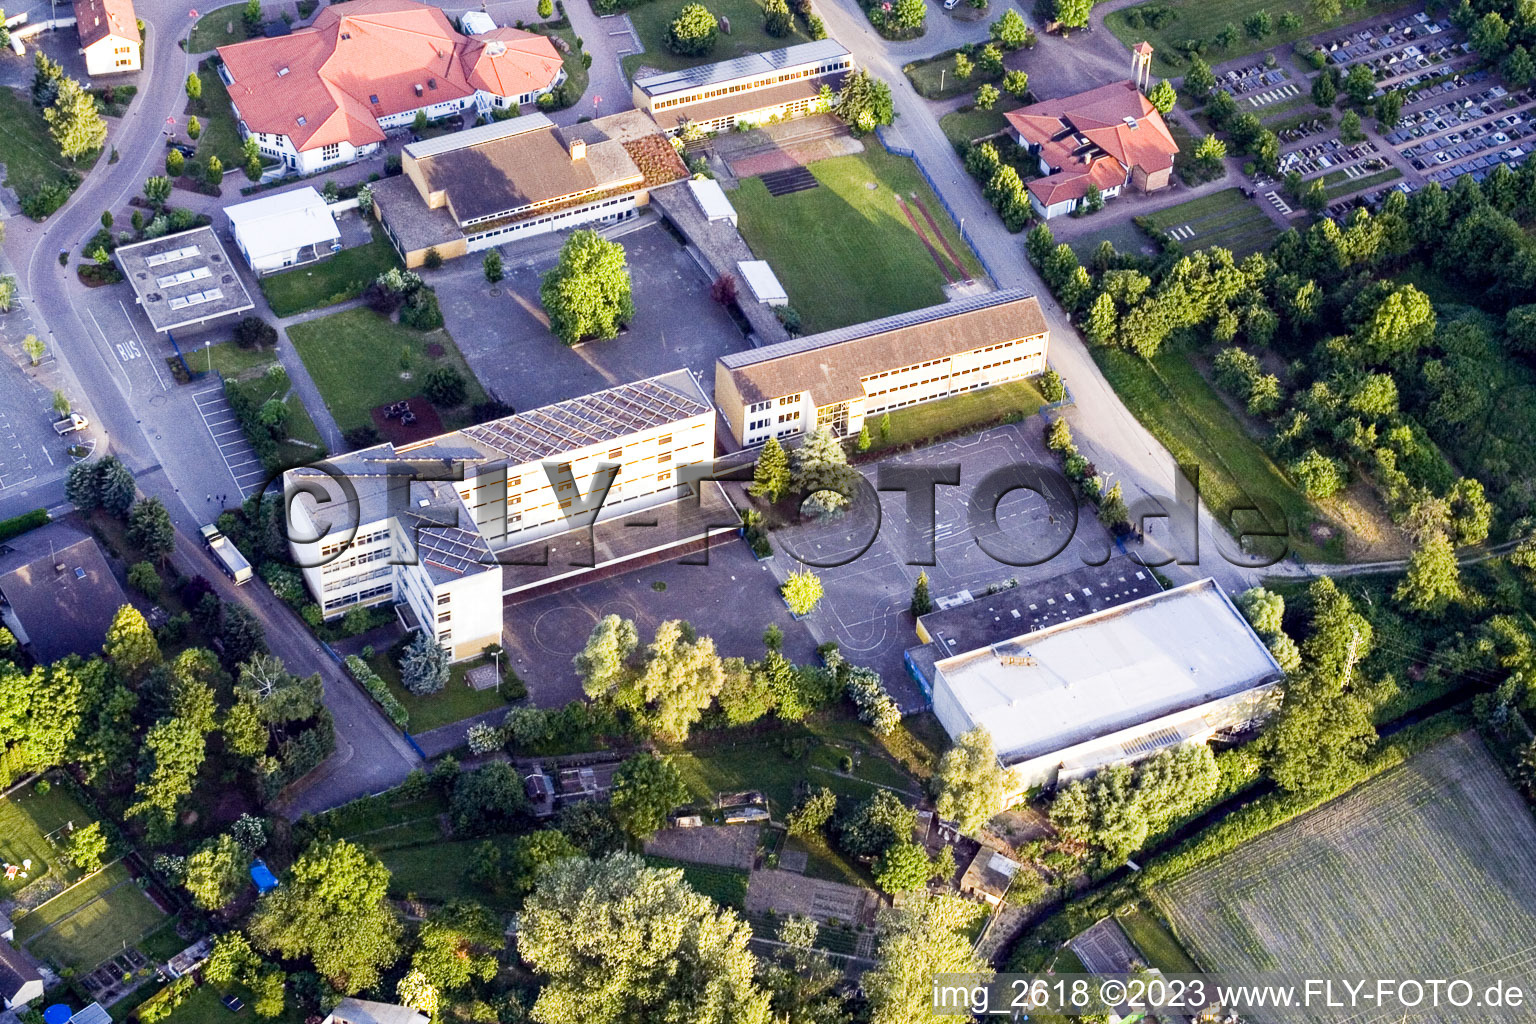 Aerial photograpy of School center in Hagenbach in the state Rhineland-Palatinate, Germany